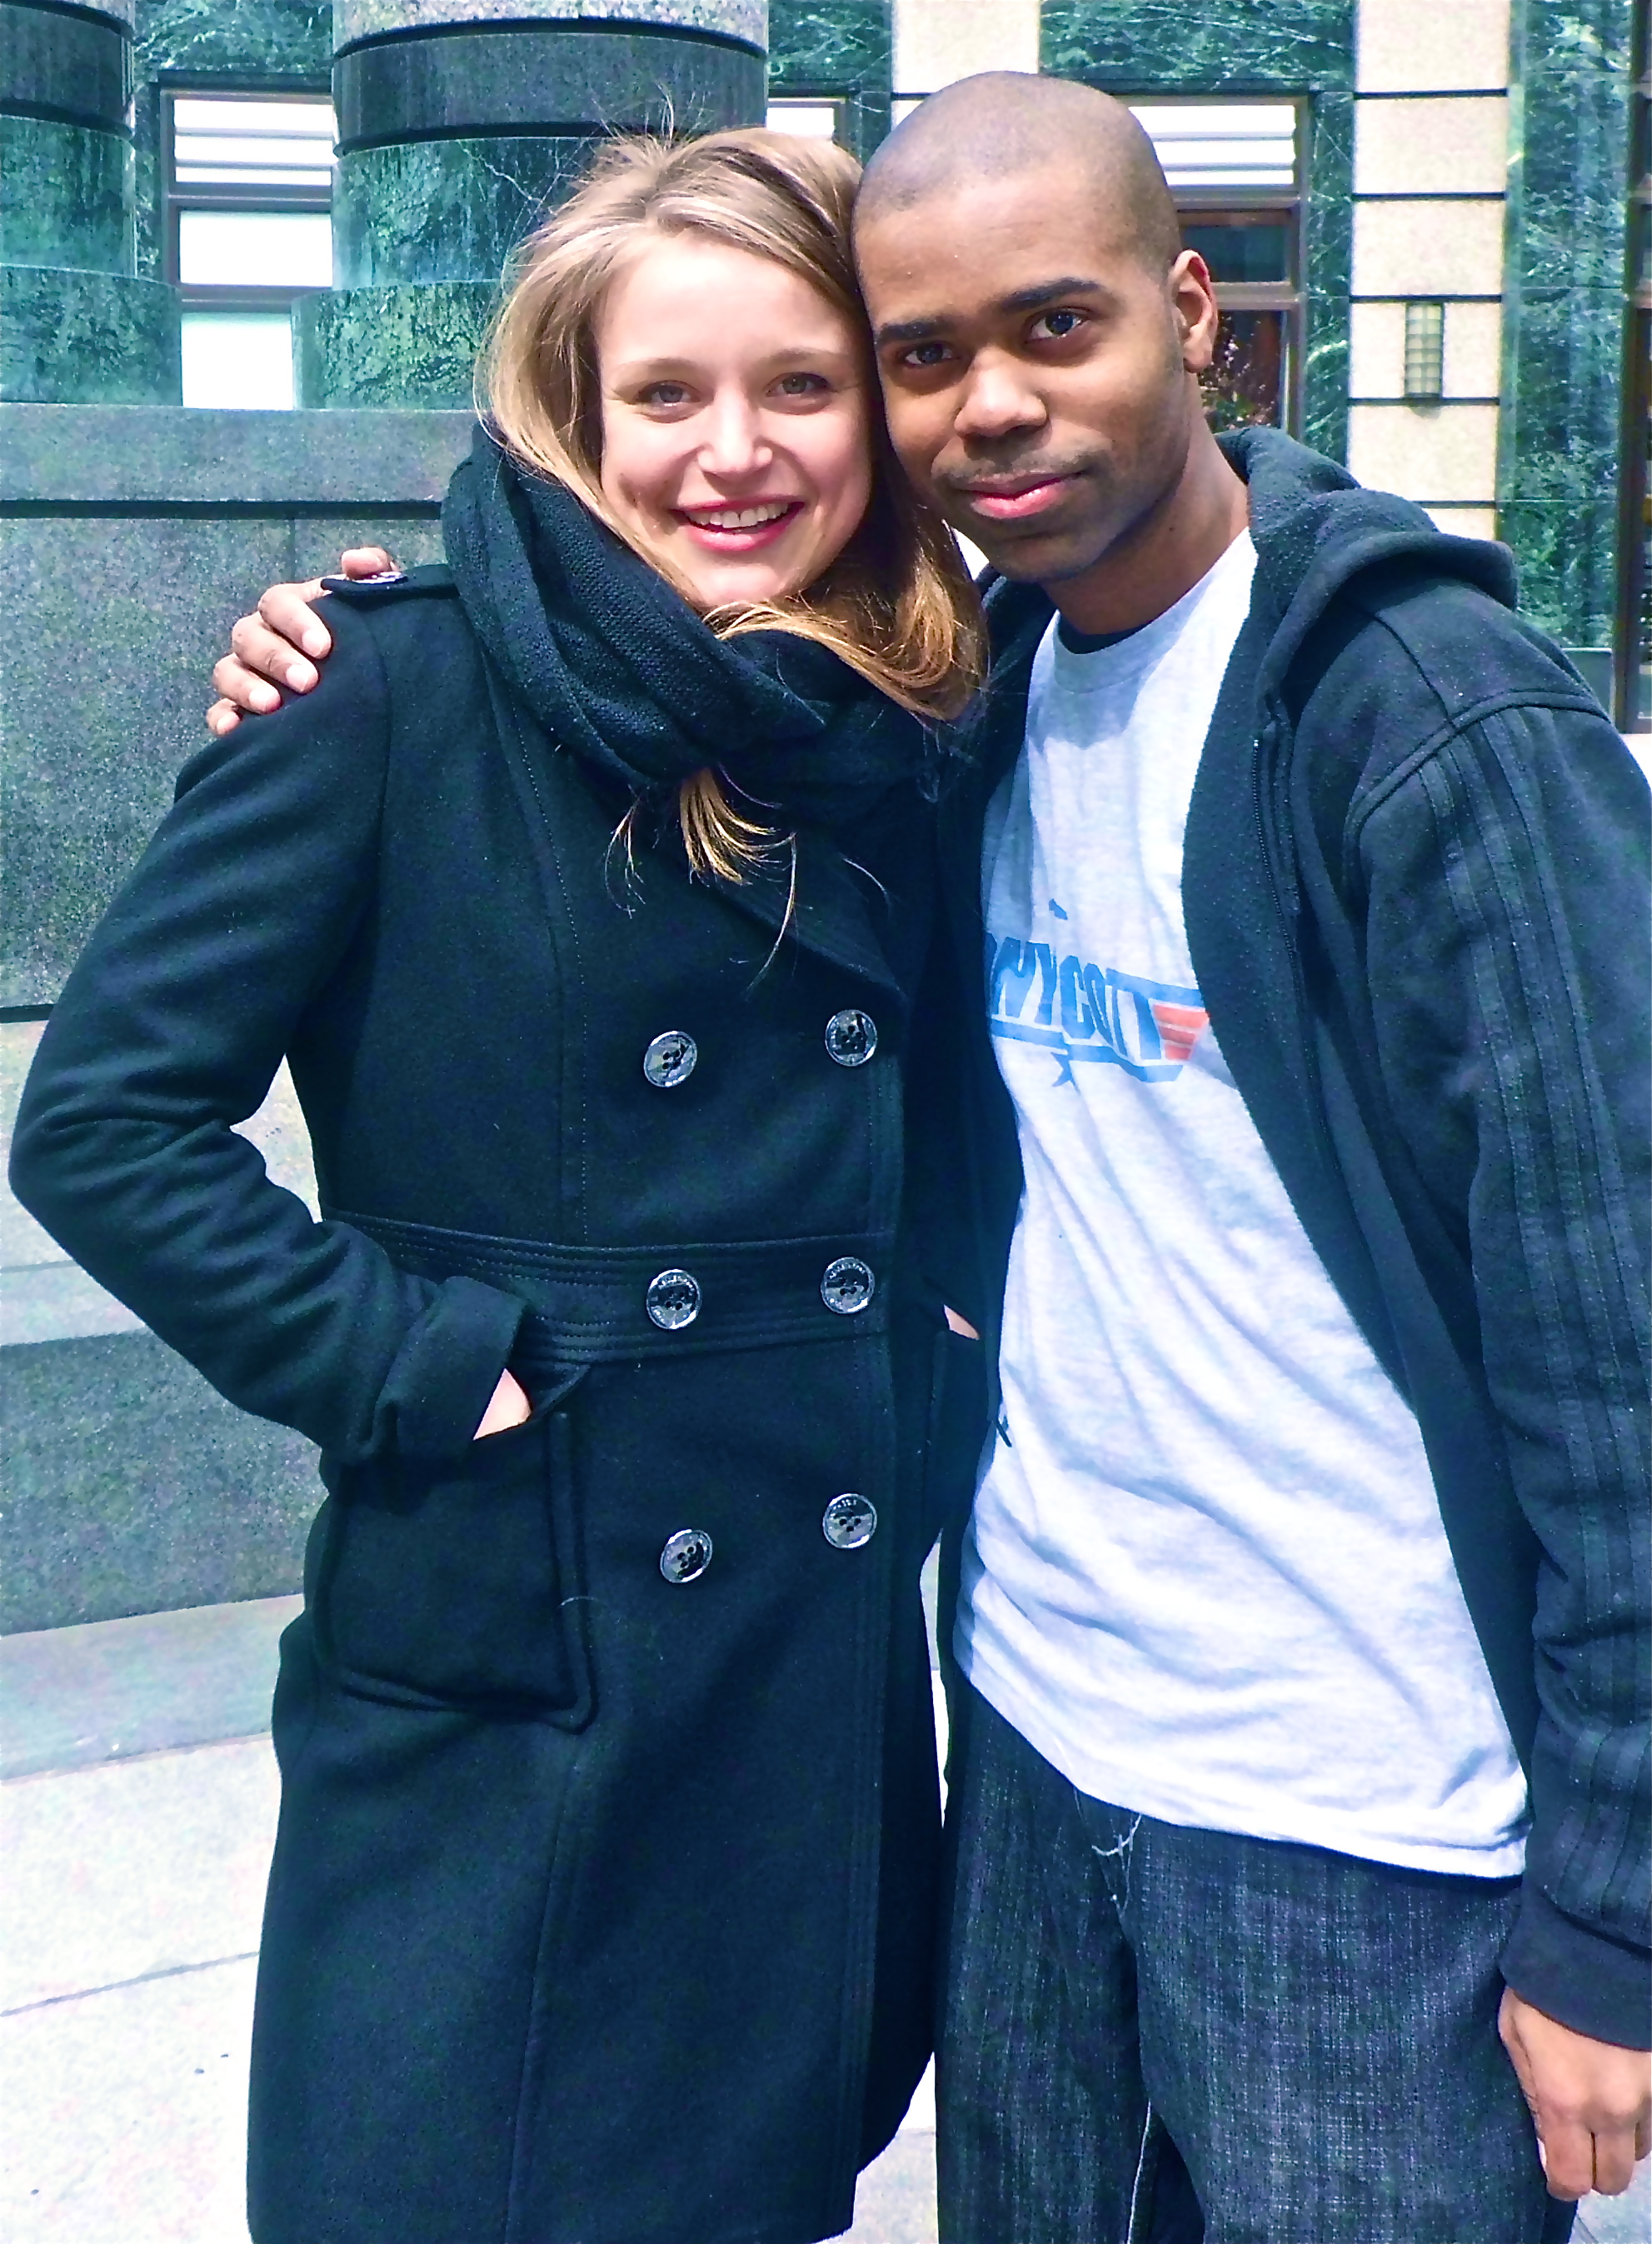 actress Ingrid Vollset and director Michael Ray on the set of Calvin Klein TV commercial in February 2013